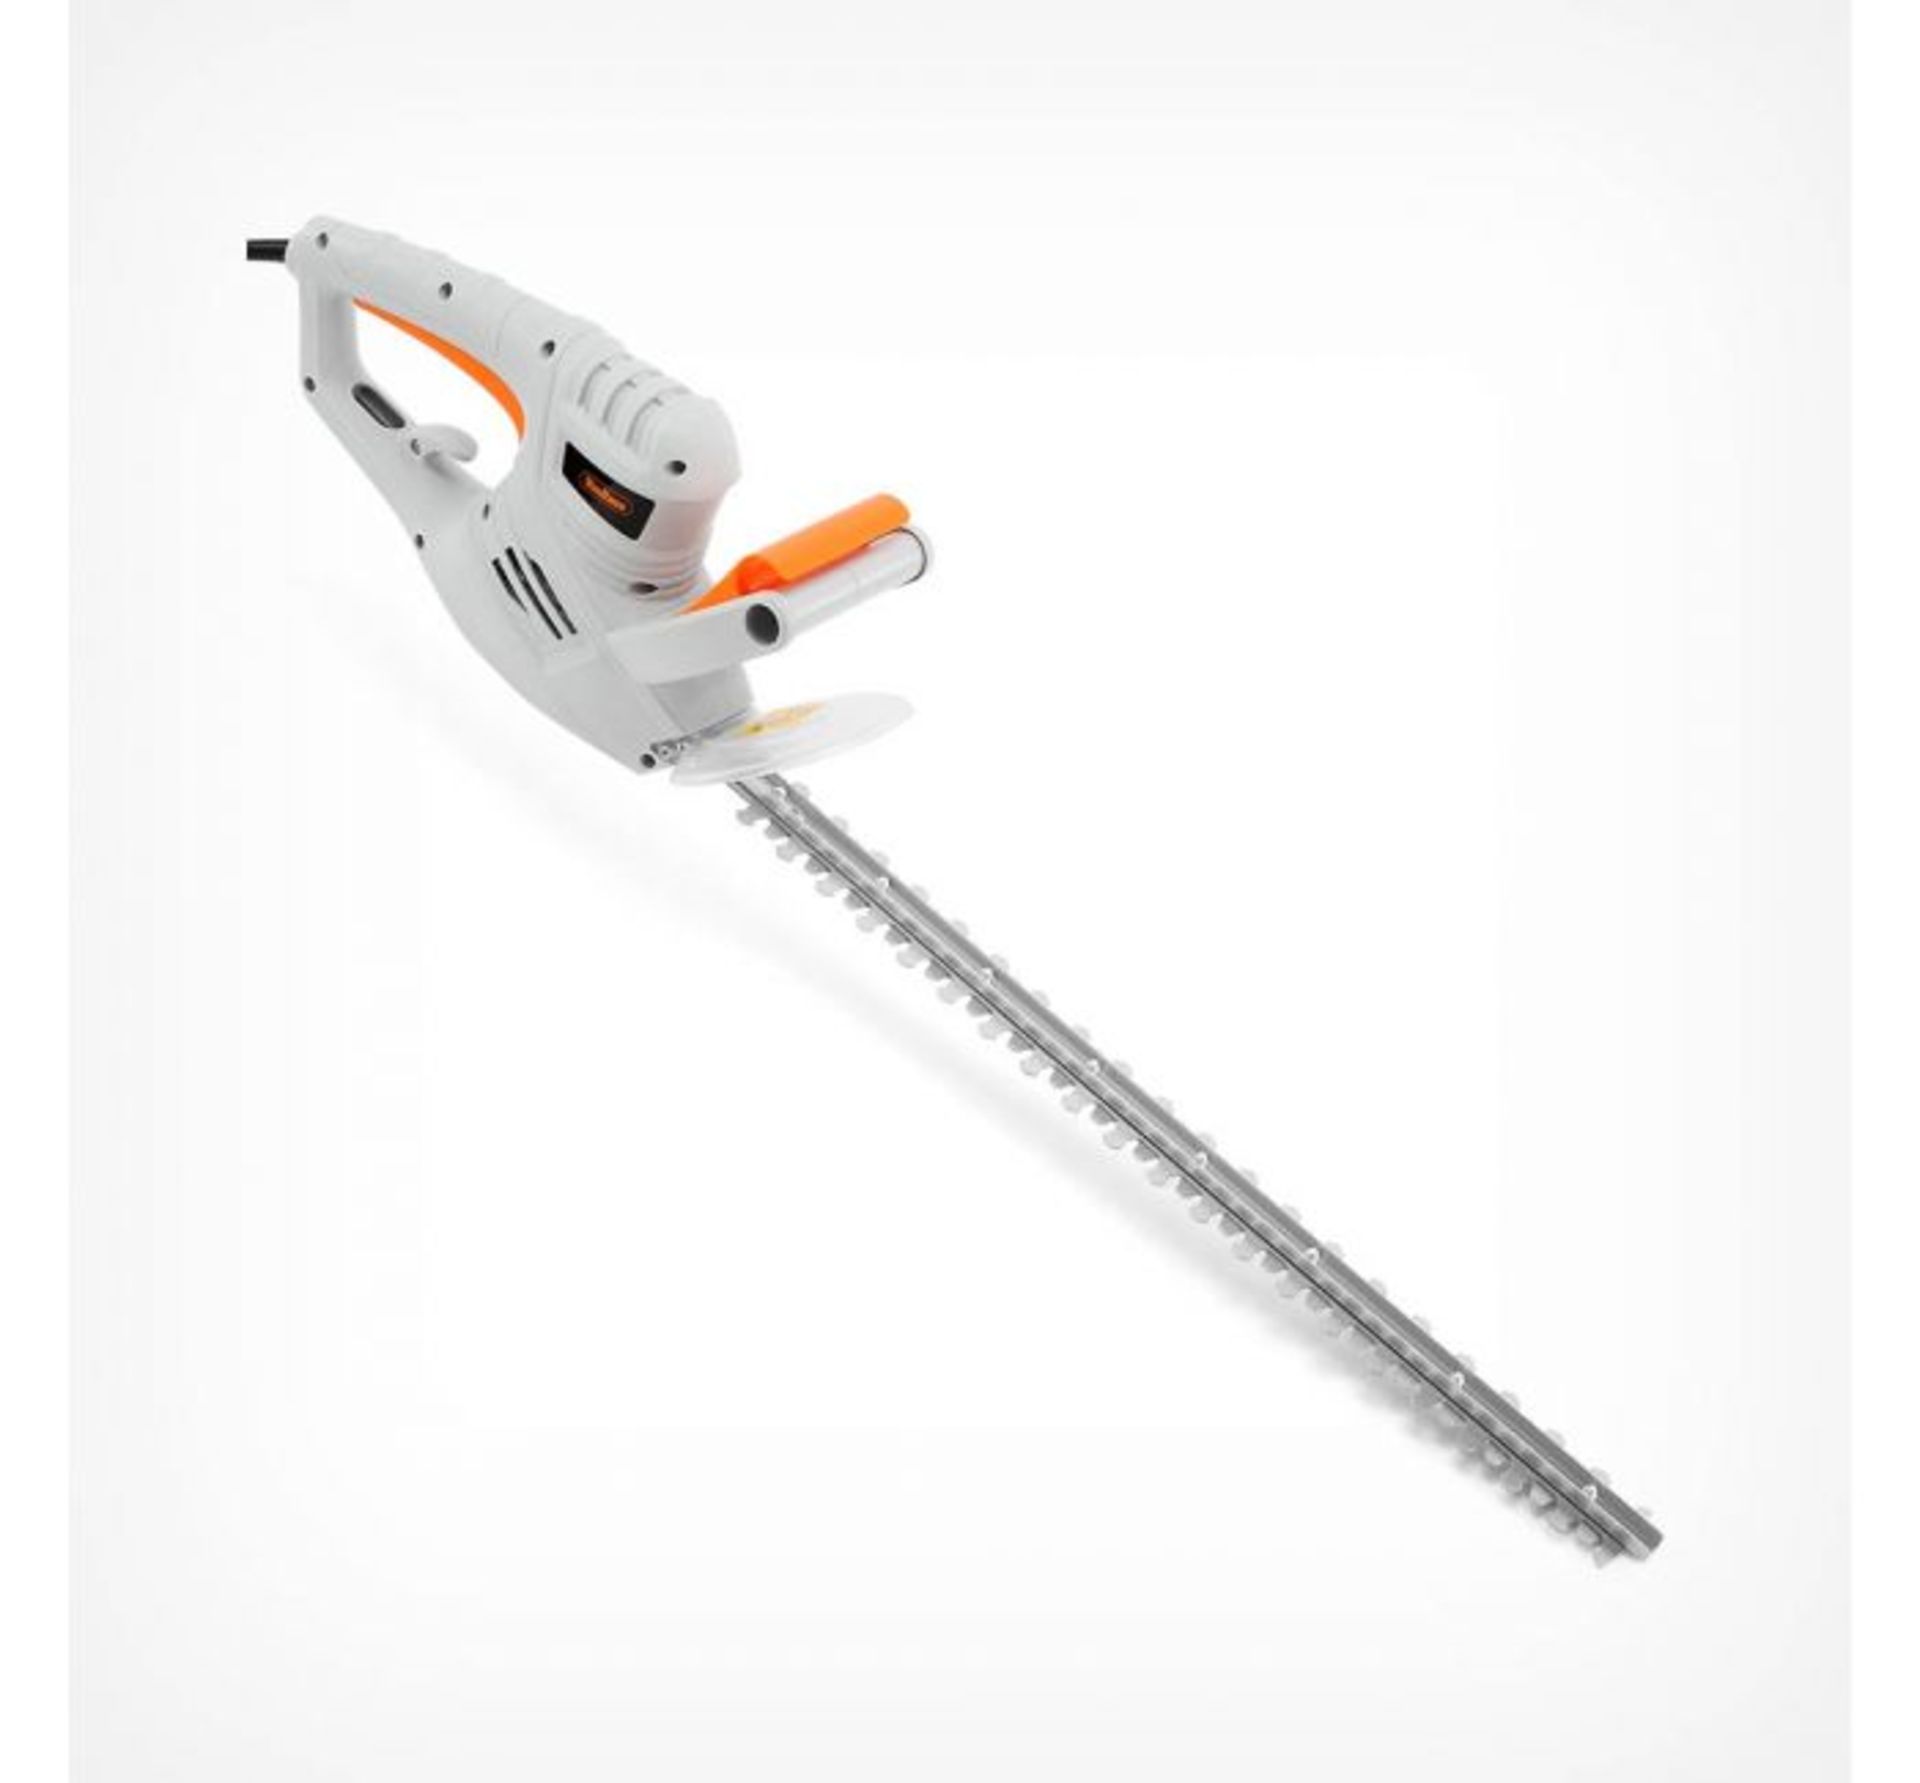 (F57) 550W Hedge Trimmer Lightweight at only 3.2kg with a powerful 550W motor and precision bl... - Bild 2 aus 3